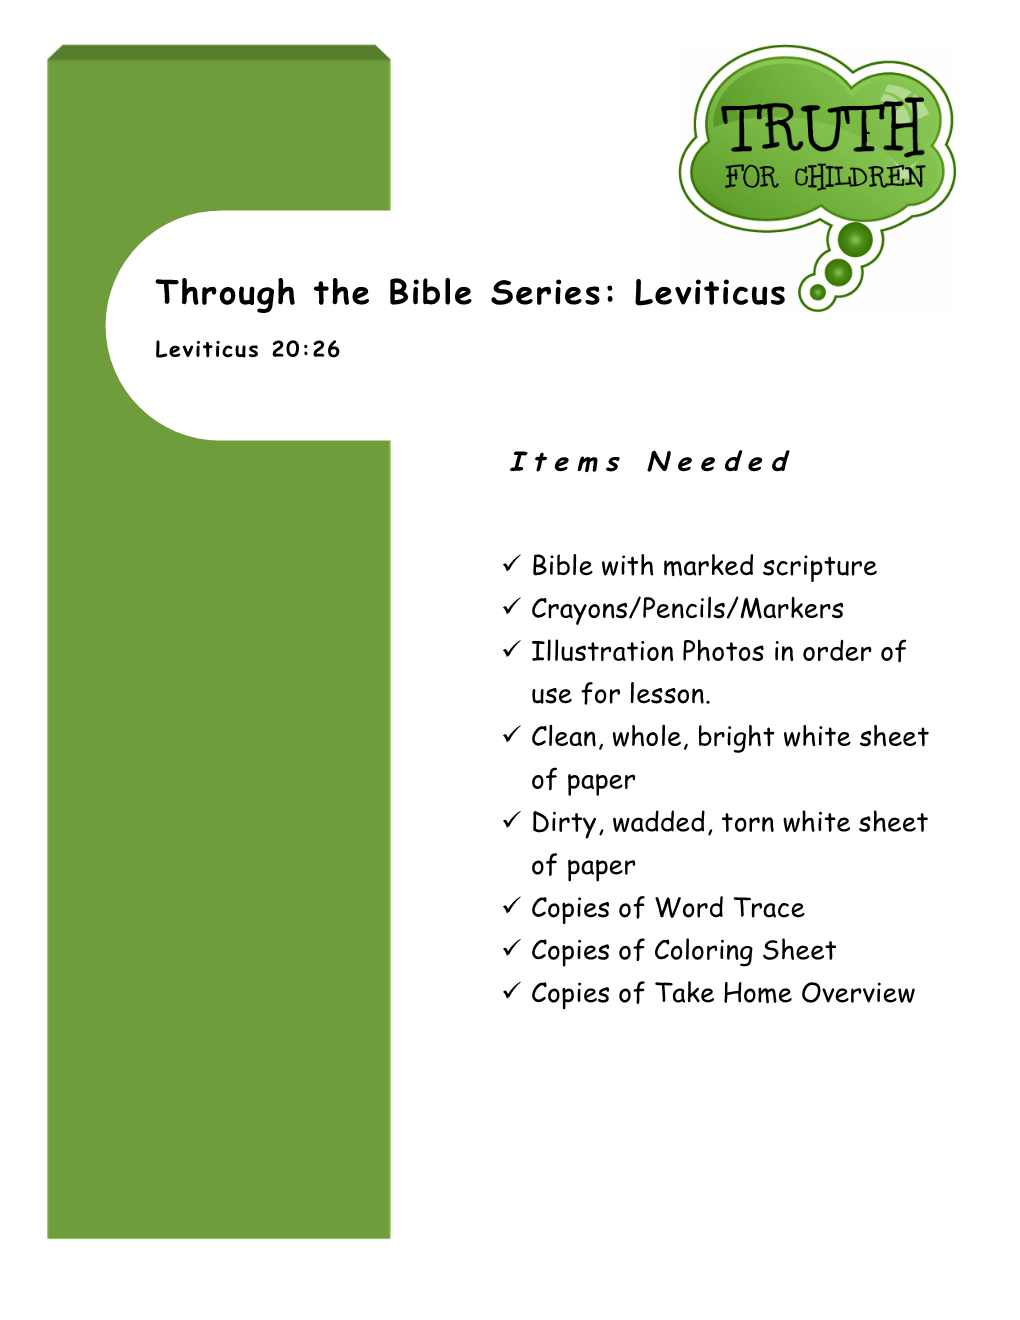 Through the Bible Series: Leviticus